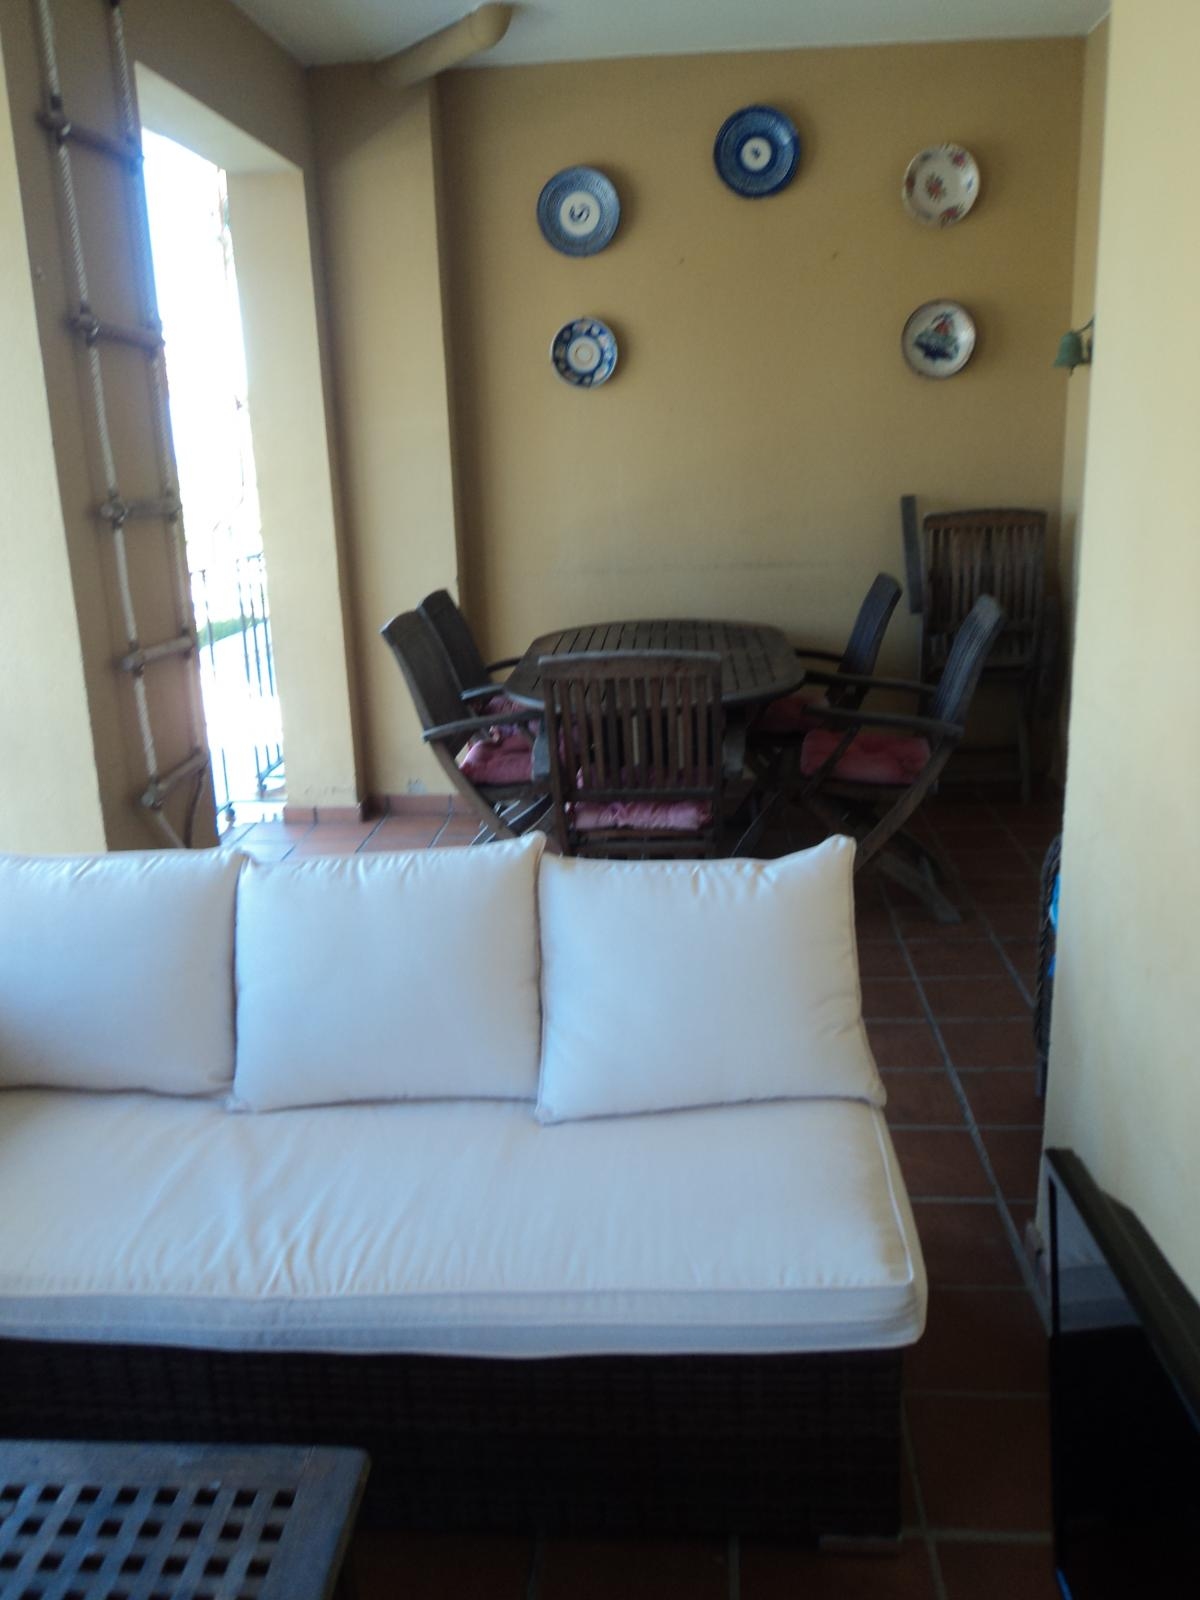 Flat for sale in Rota